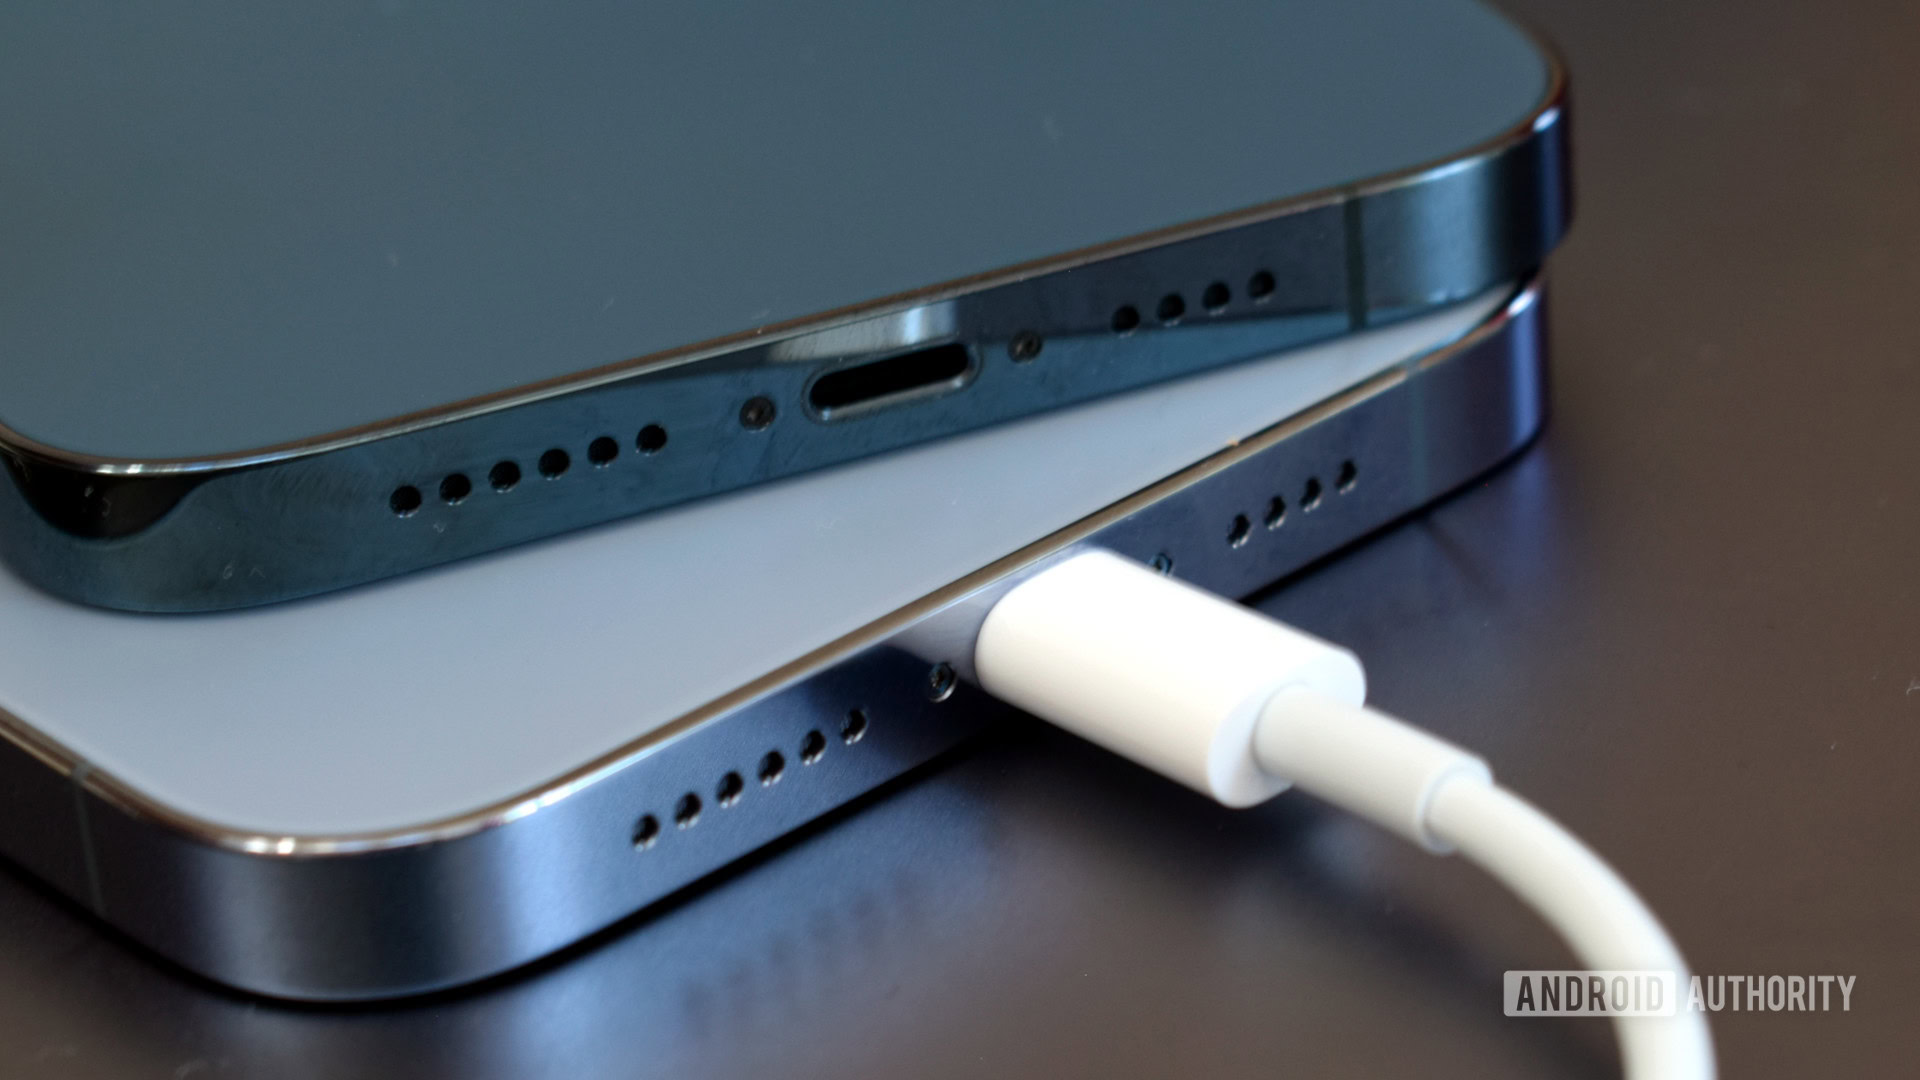 What does 'iPhone cable not supported' mean? - Android Authority